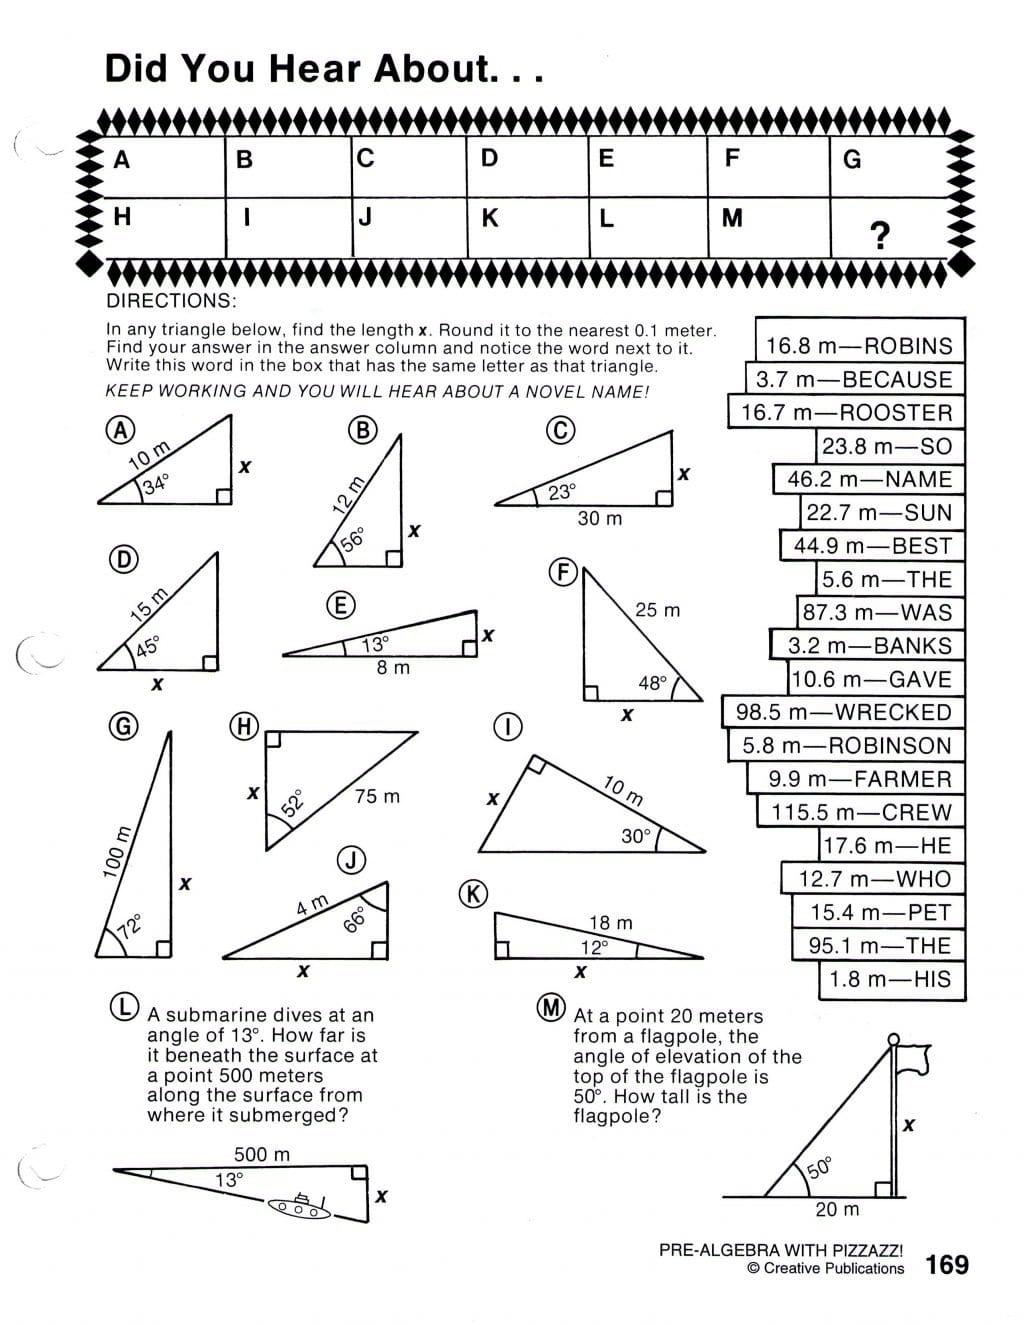 Books Never Written Math Worksheet Page 34  Image Within Books Never Written Math Worksheet